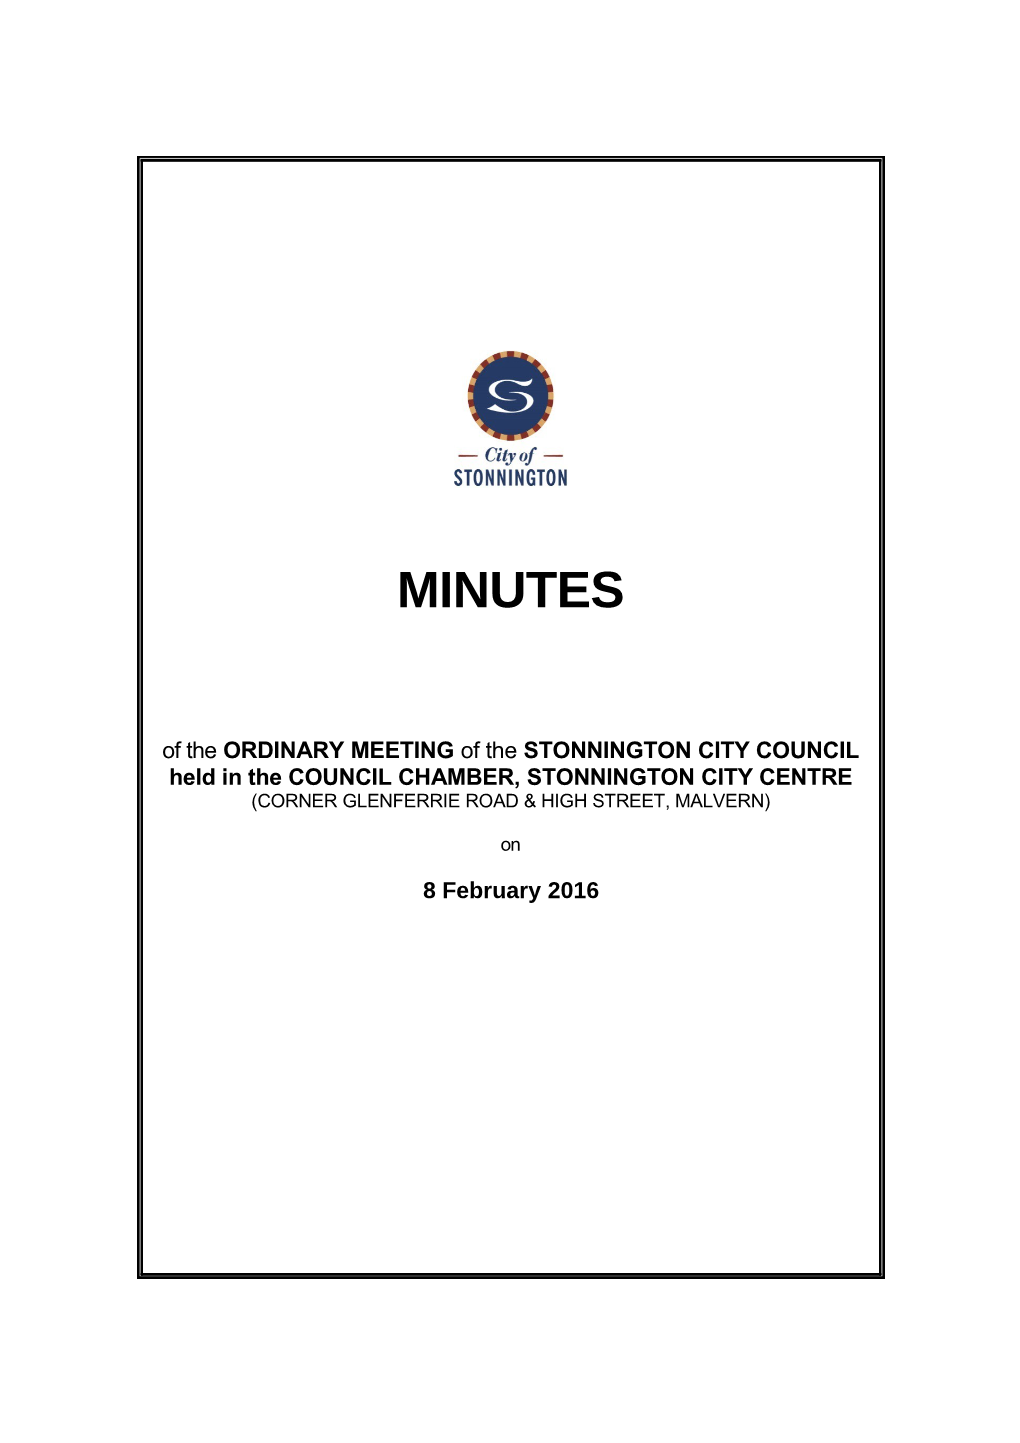 Minutes of Council Meeting - 8 February 2016